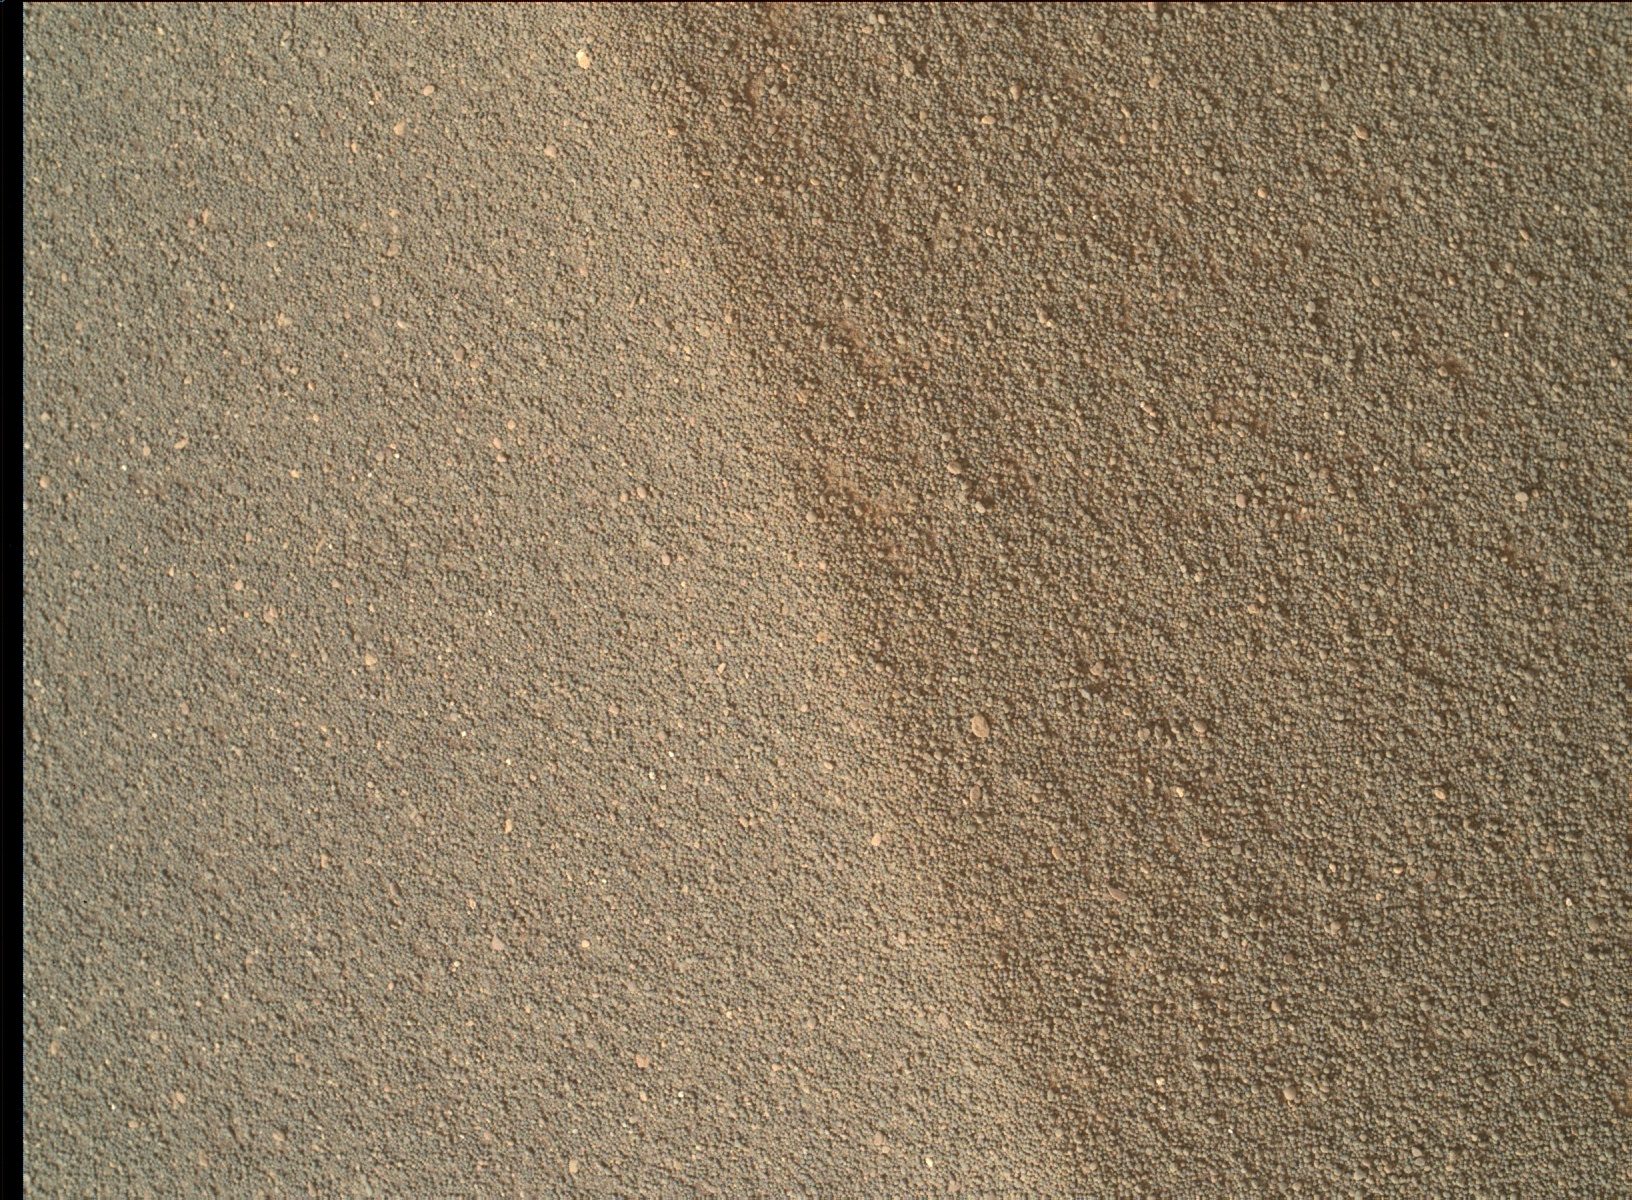 Nasa's Mars rover Curiosity acquired this image using its Mars Hand Lens Imager (MAHLI) on Sol 1687